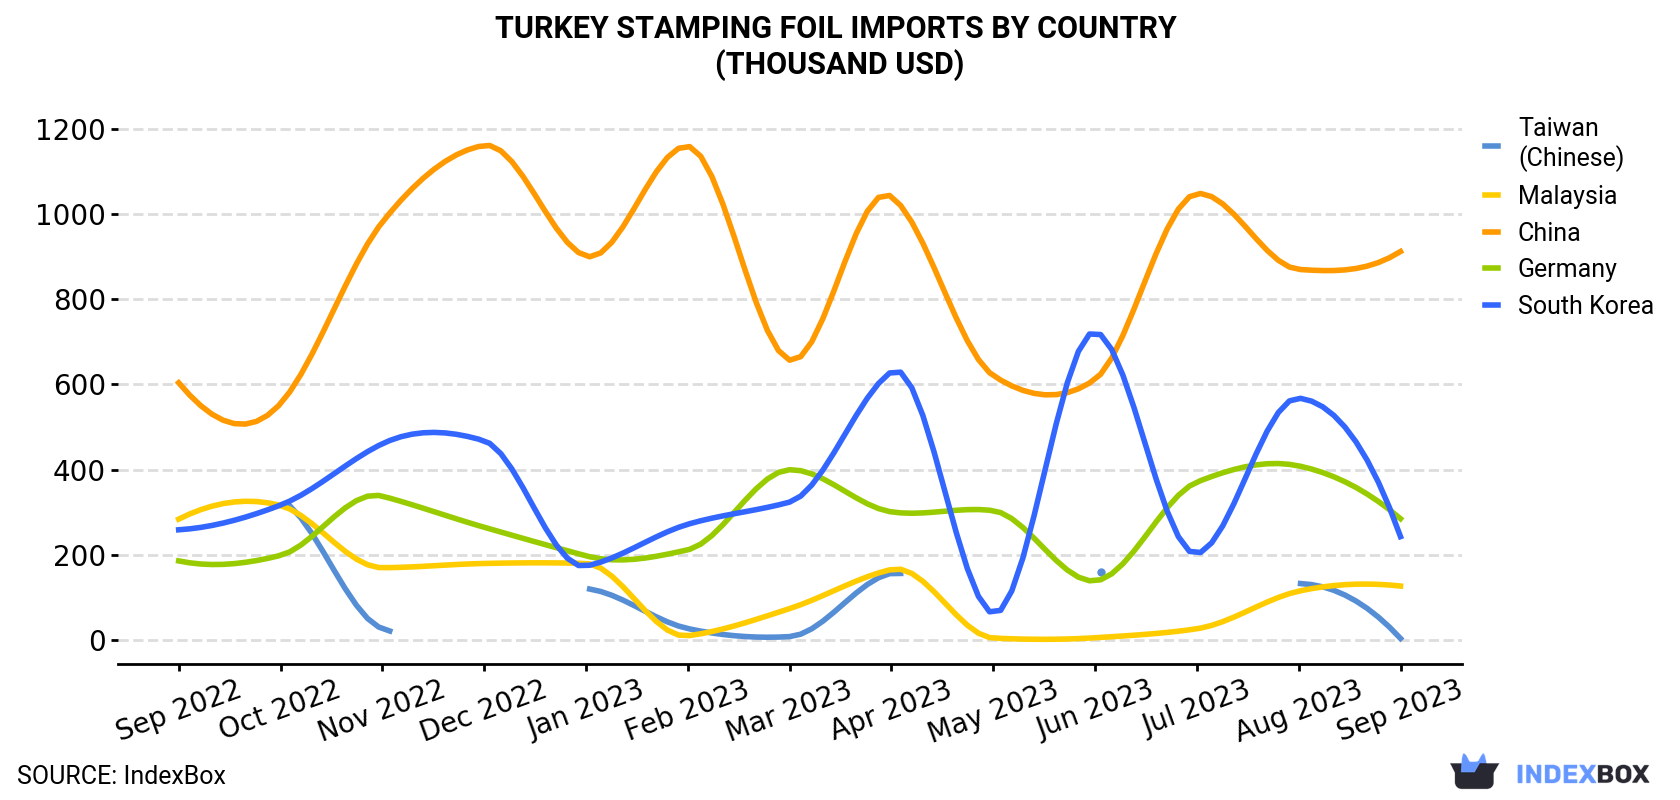 Turkey Stamping Foil Imports By Country (Thousand USD)